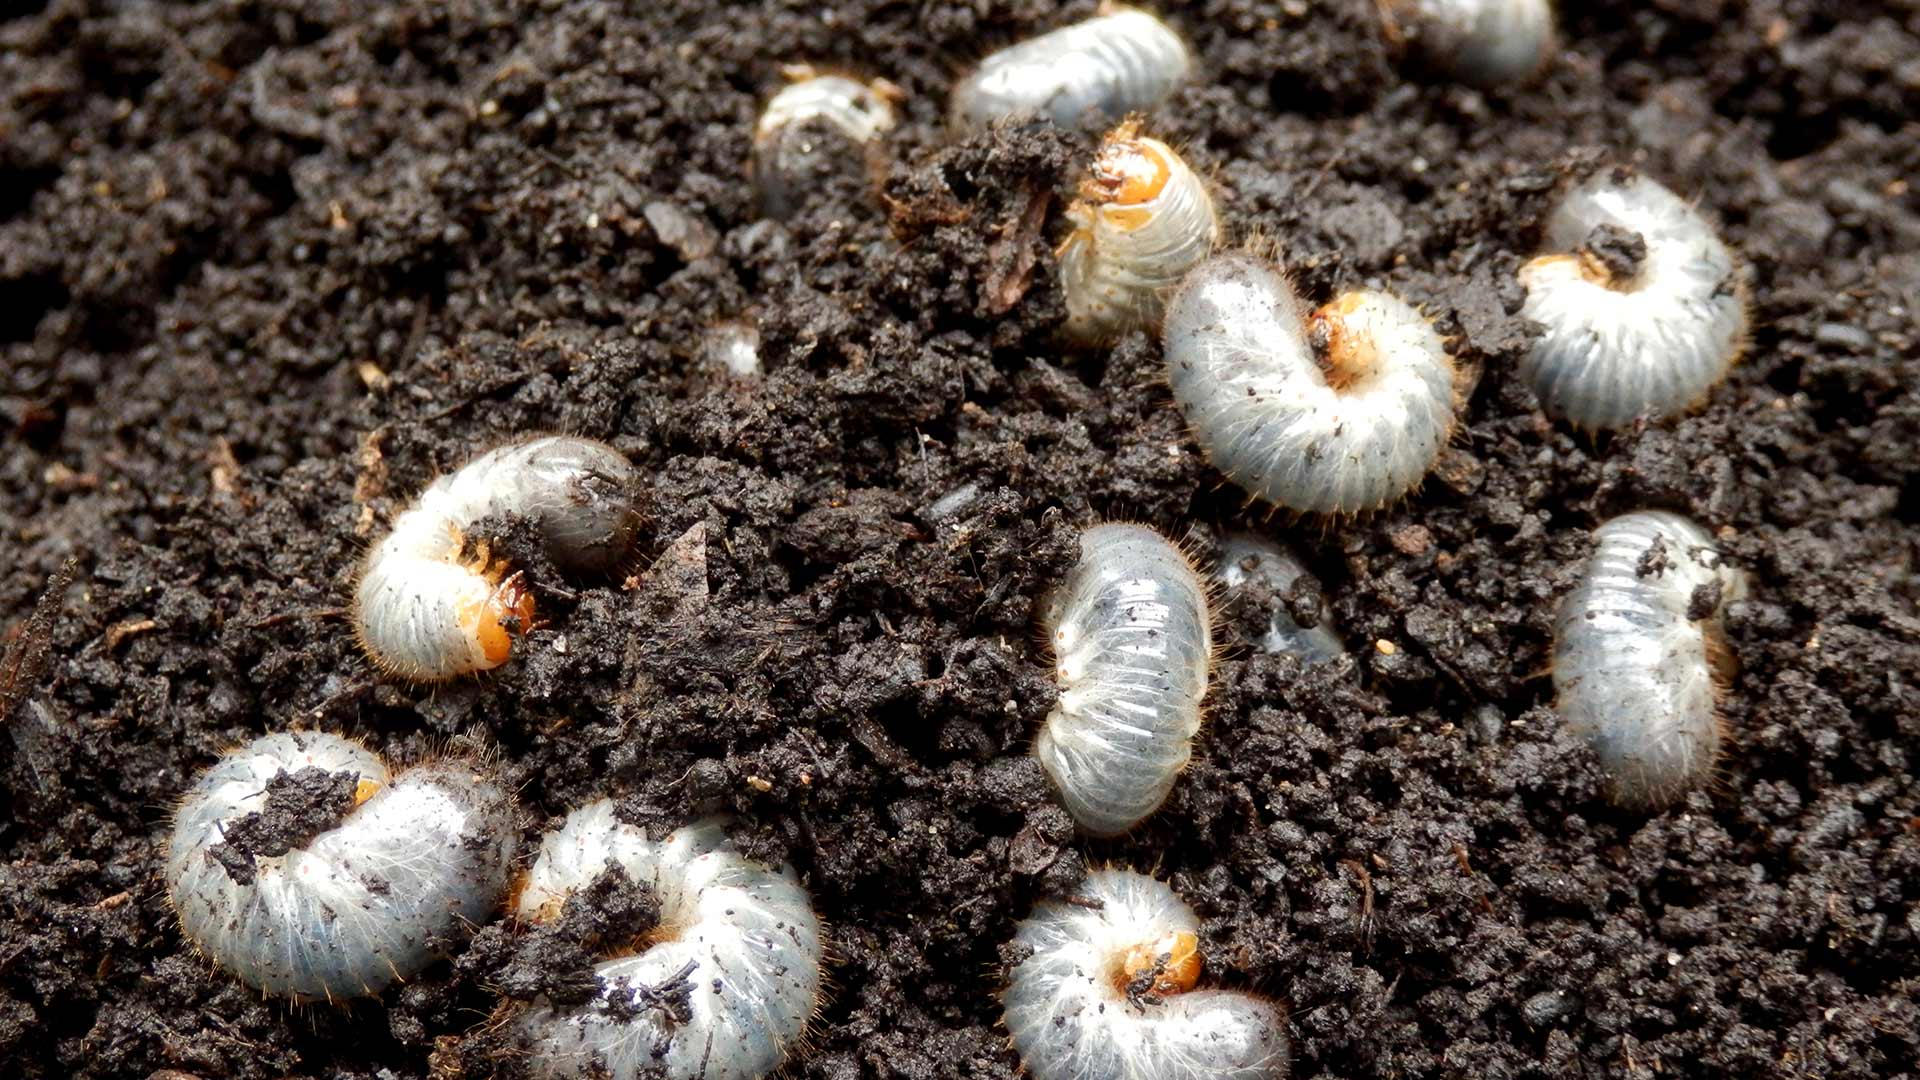 Grubs in the dirt wriggling around in Cleveland, OH and surrounding neighborhoods.